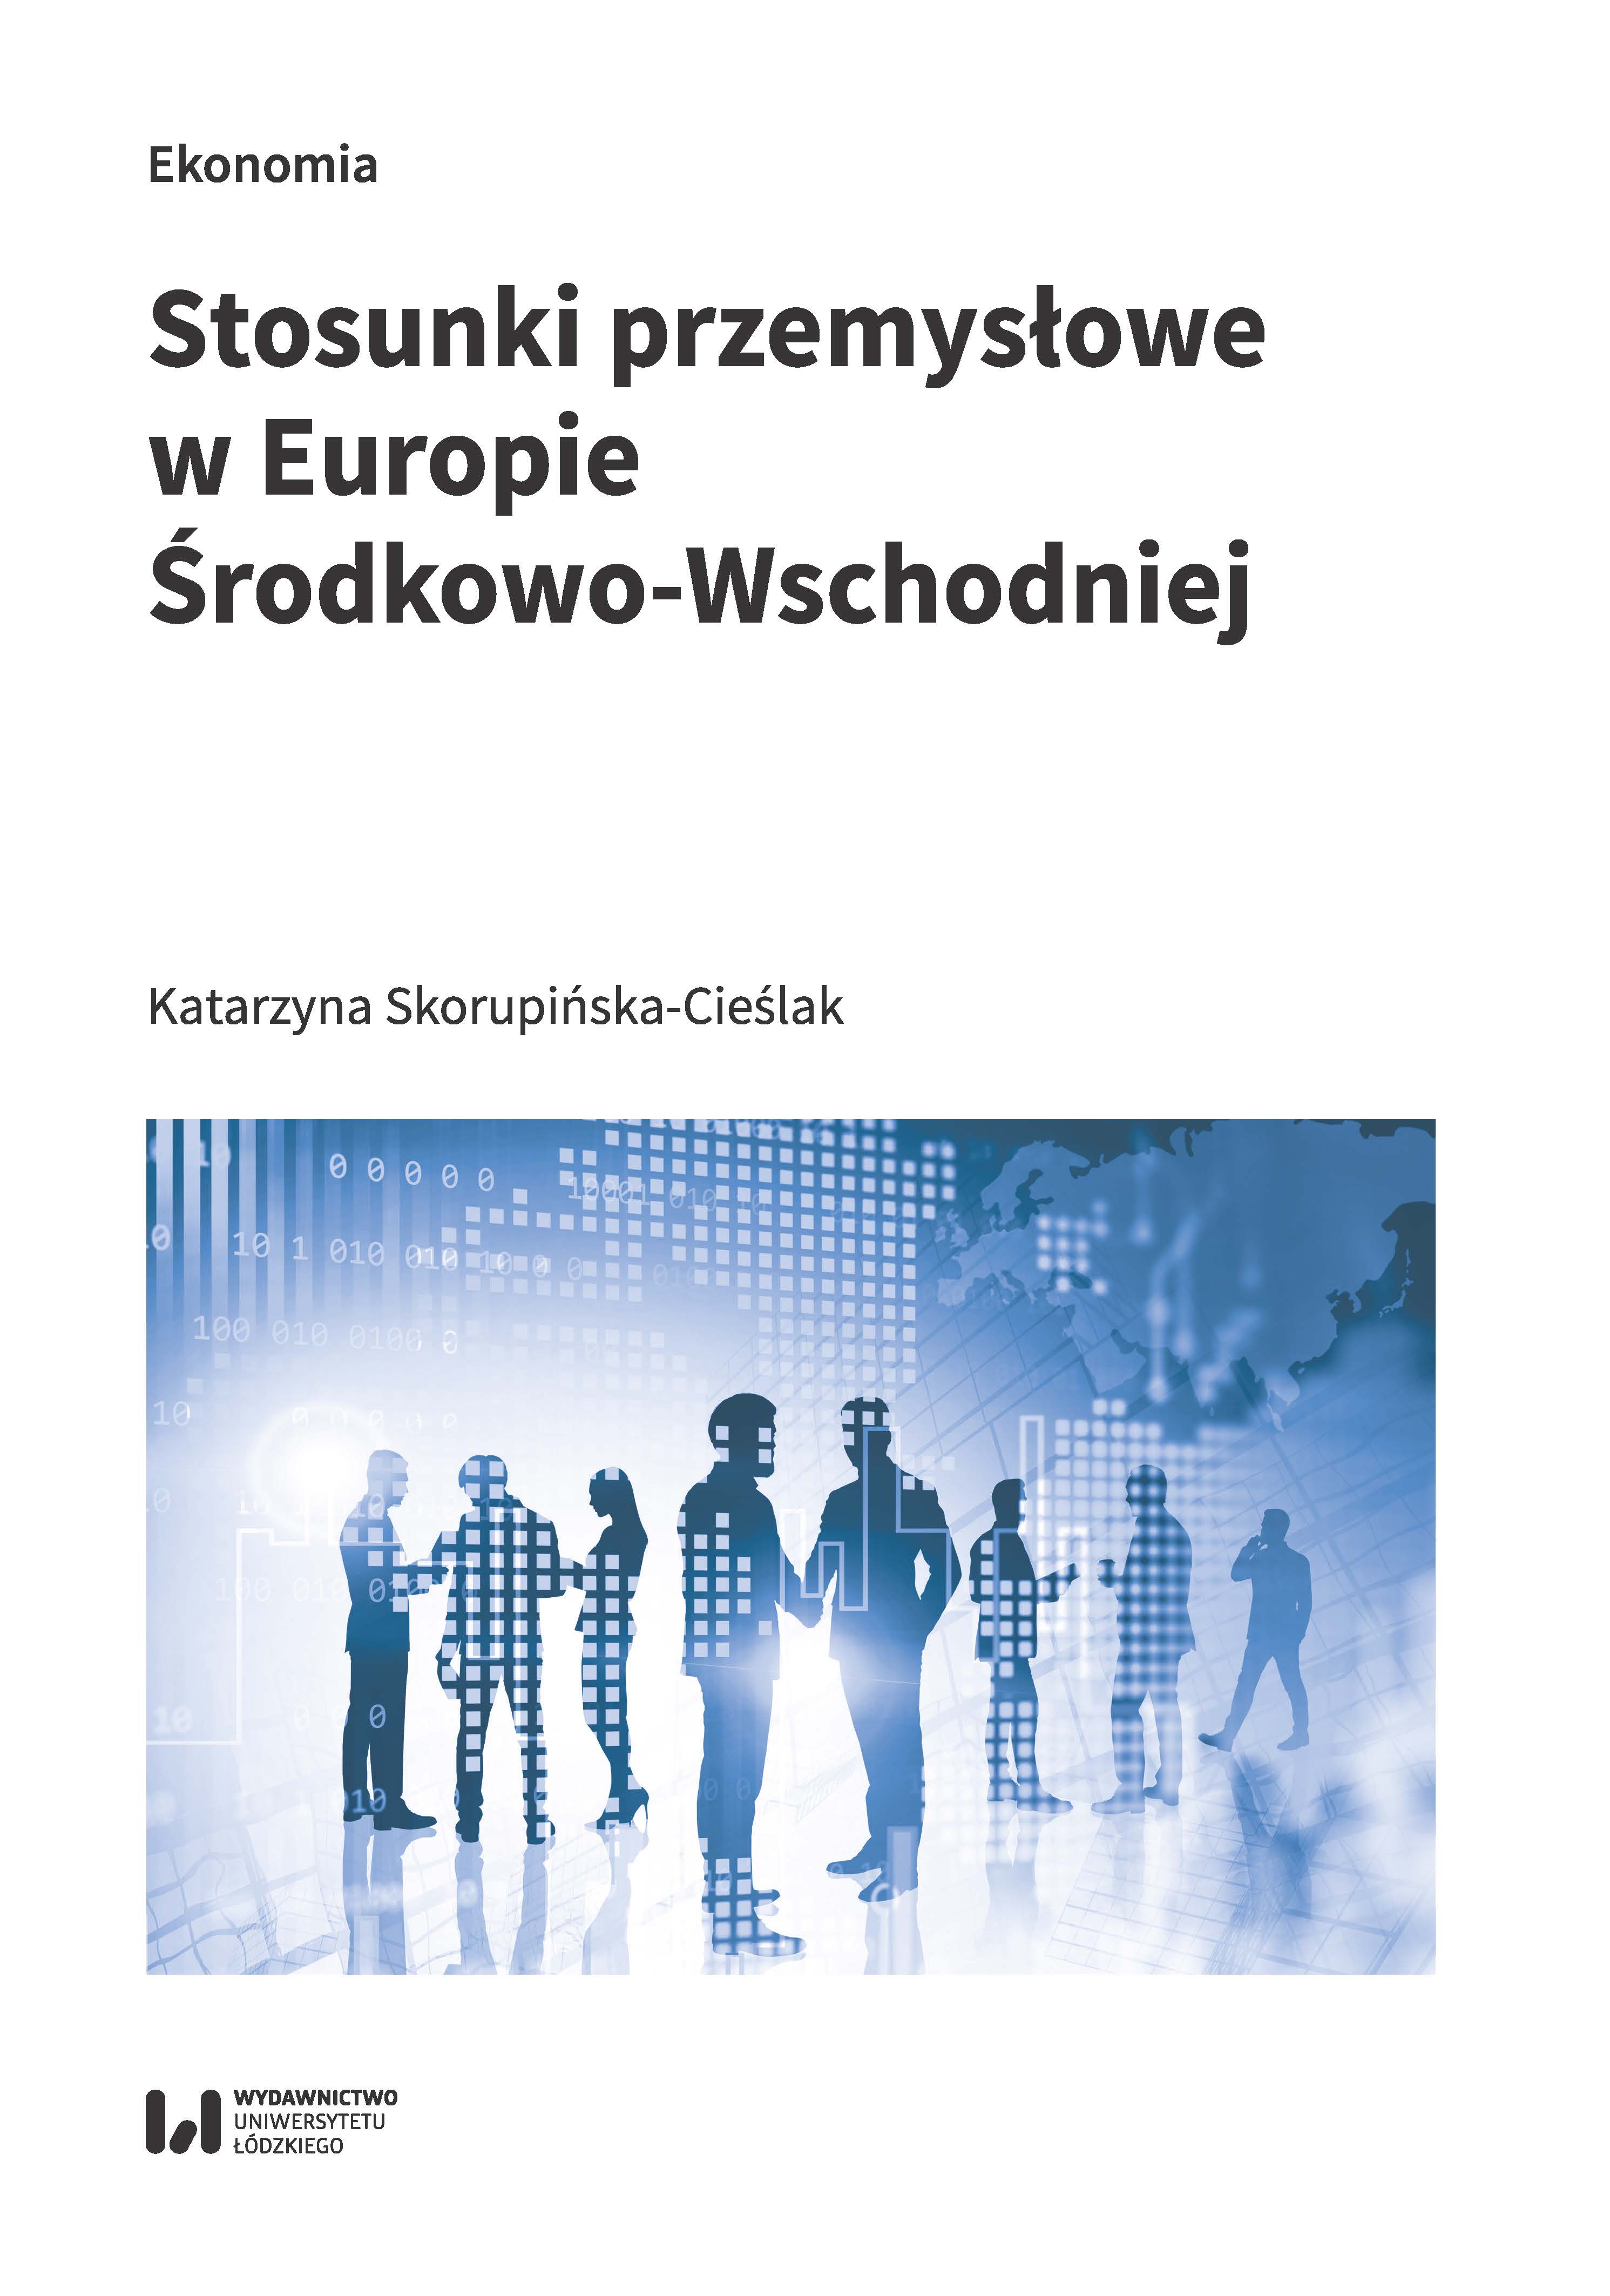 Industrial relations in Central and Eastern Europe